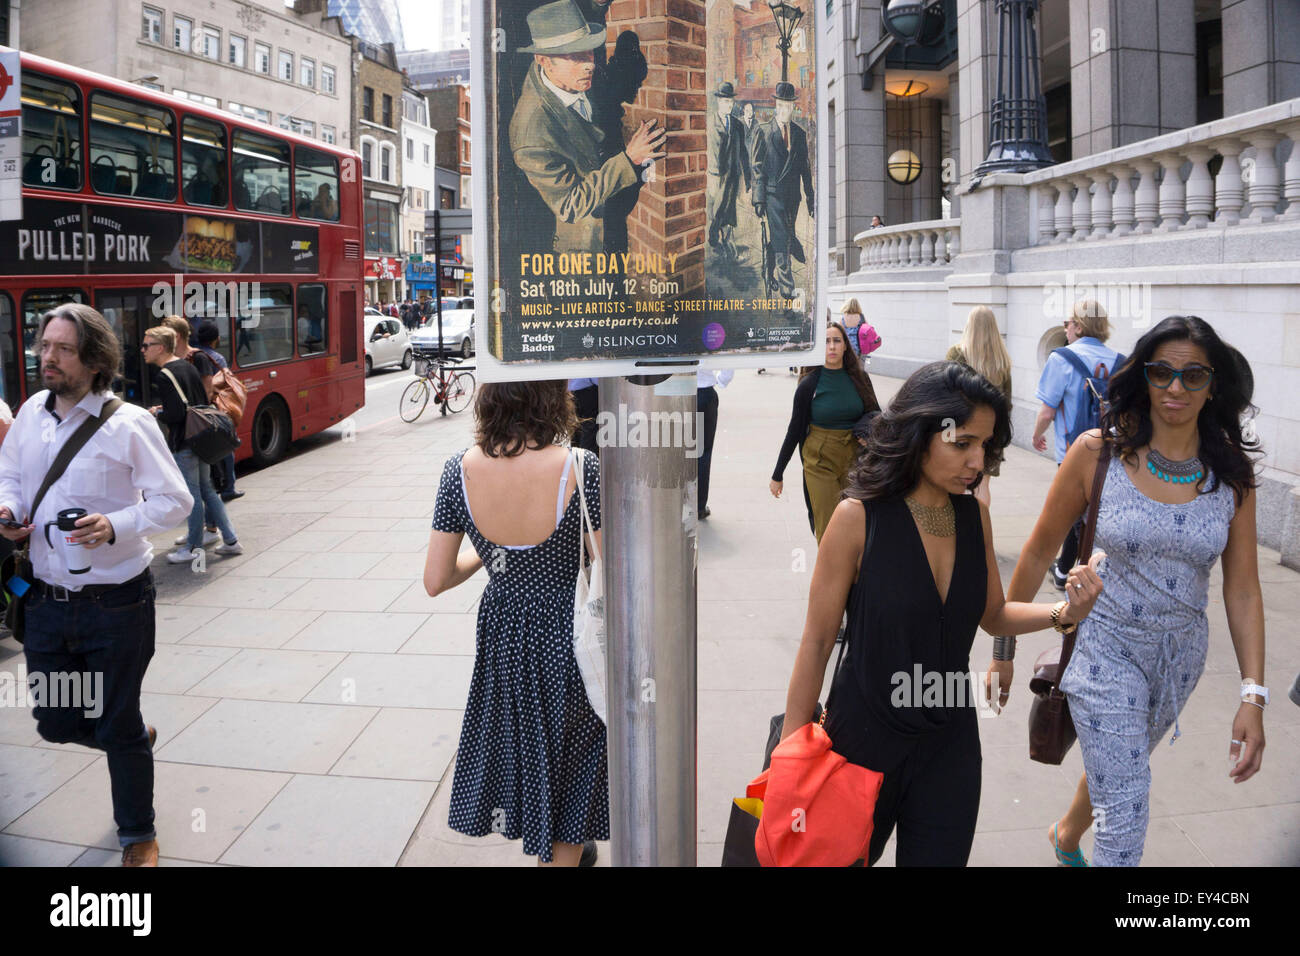 Sinister poster advertising for a club night, looks over the shoulders of passing people near to Liverpool Street station on Bishopsgate. London, UK. The character on the poster is that of a 1940s secret agent, private investigator or spy looking at his target. Stock Photo